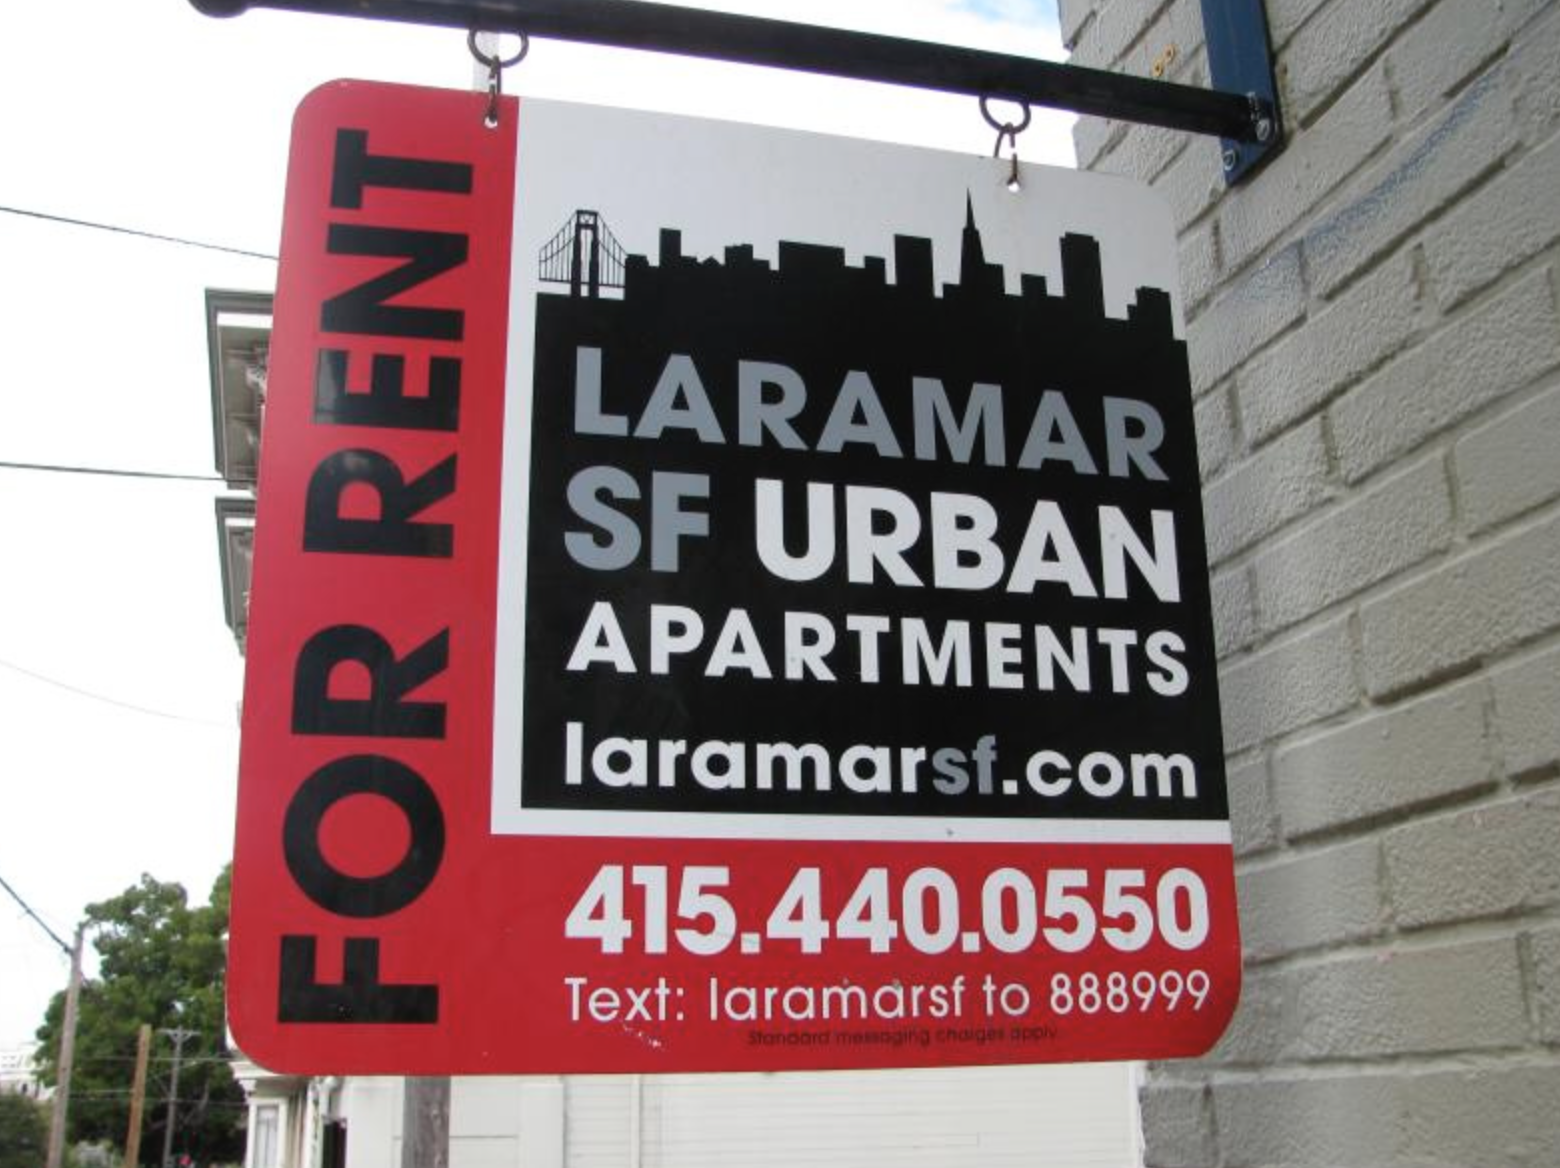 For rent sign in San Francisco